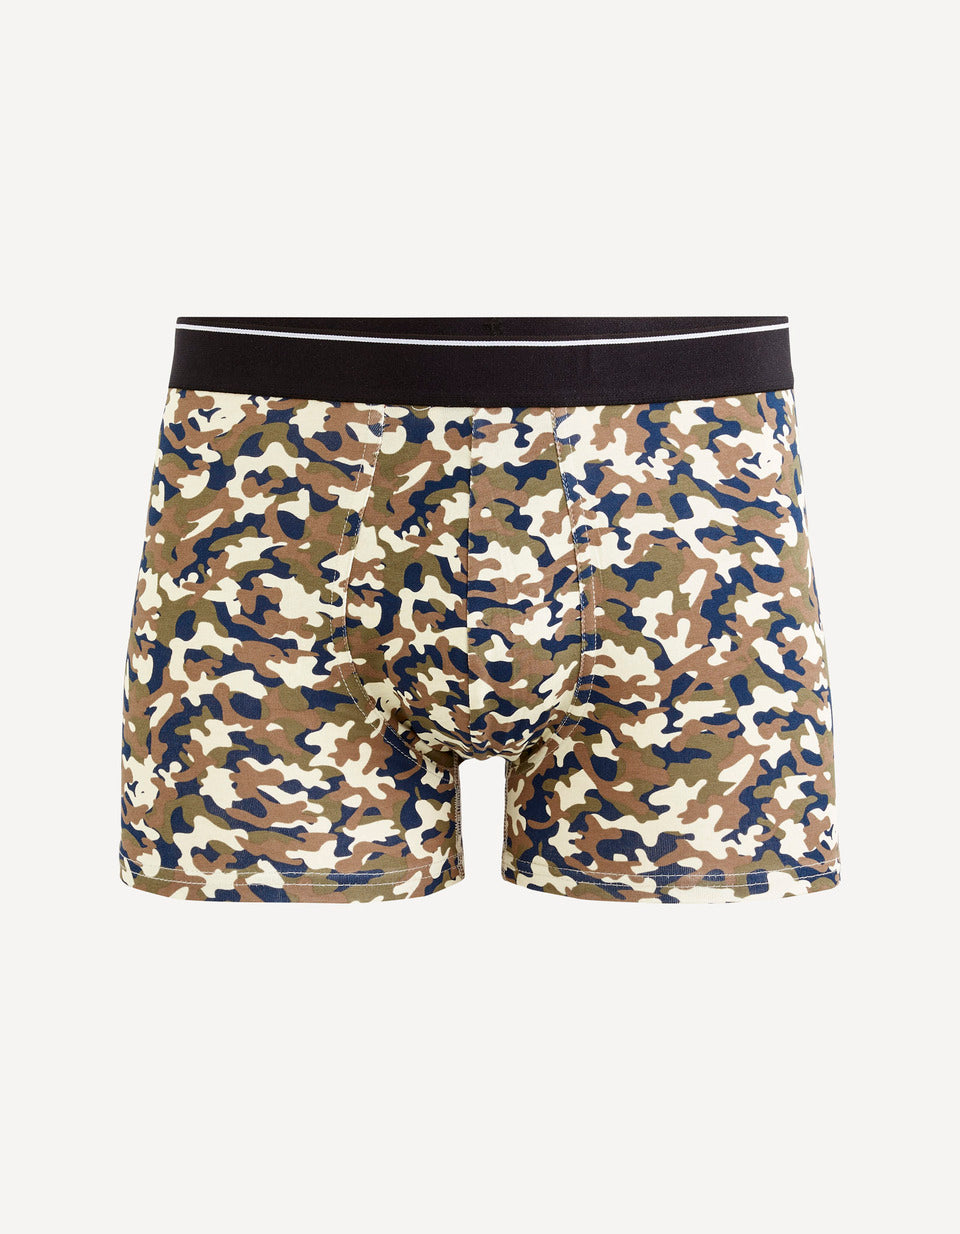 Camouflage Stretch Cotton Boxers - 01